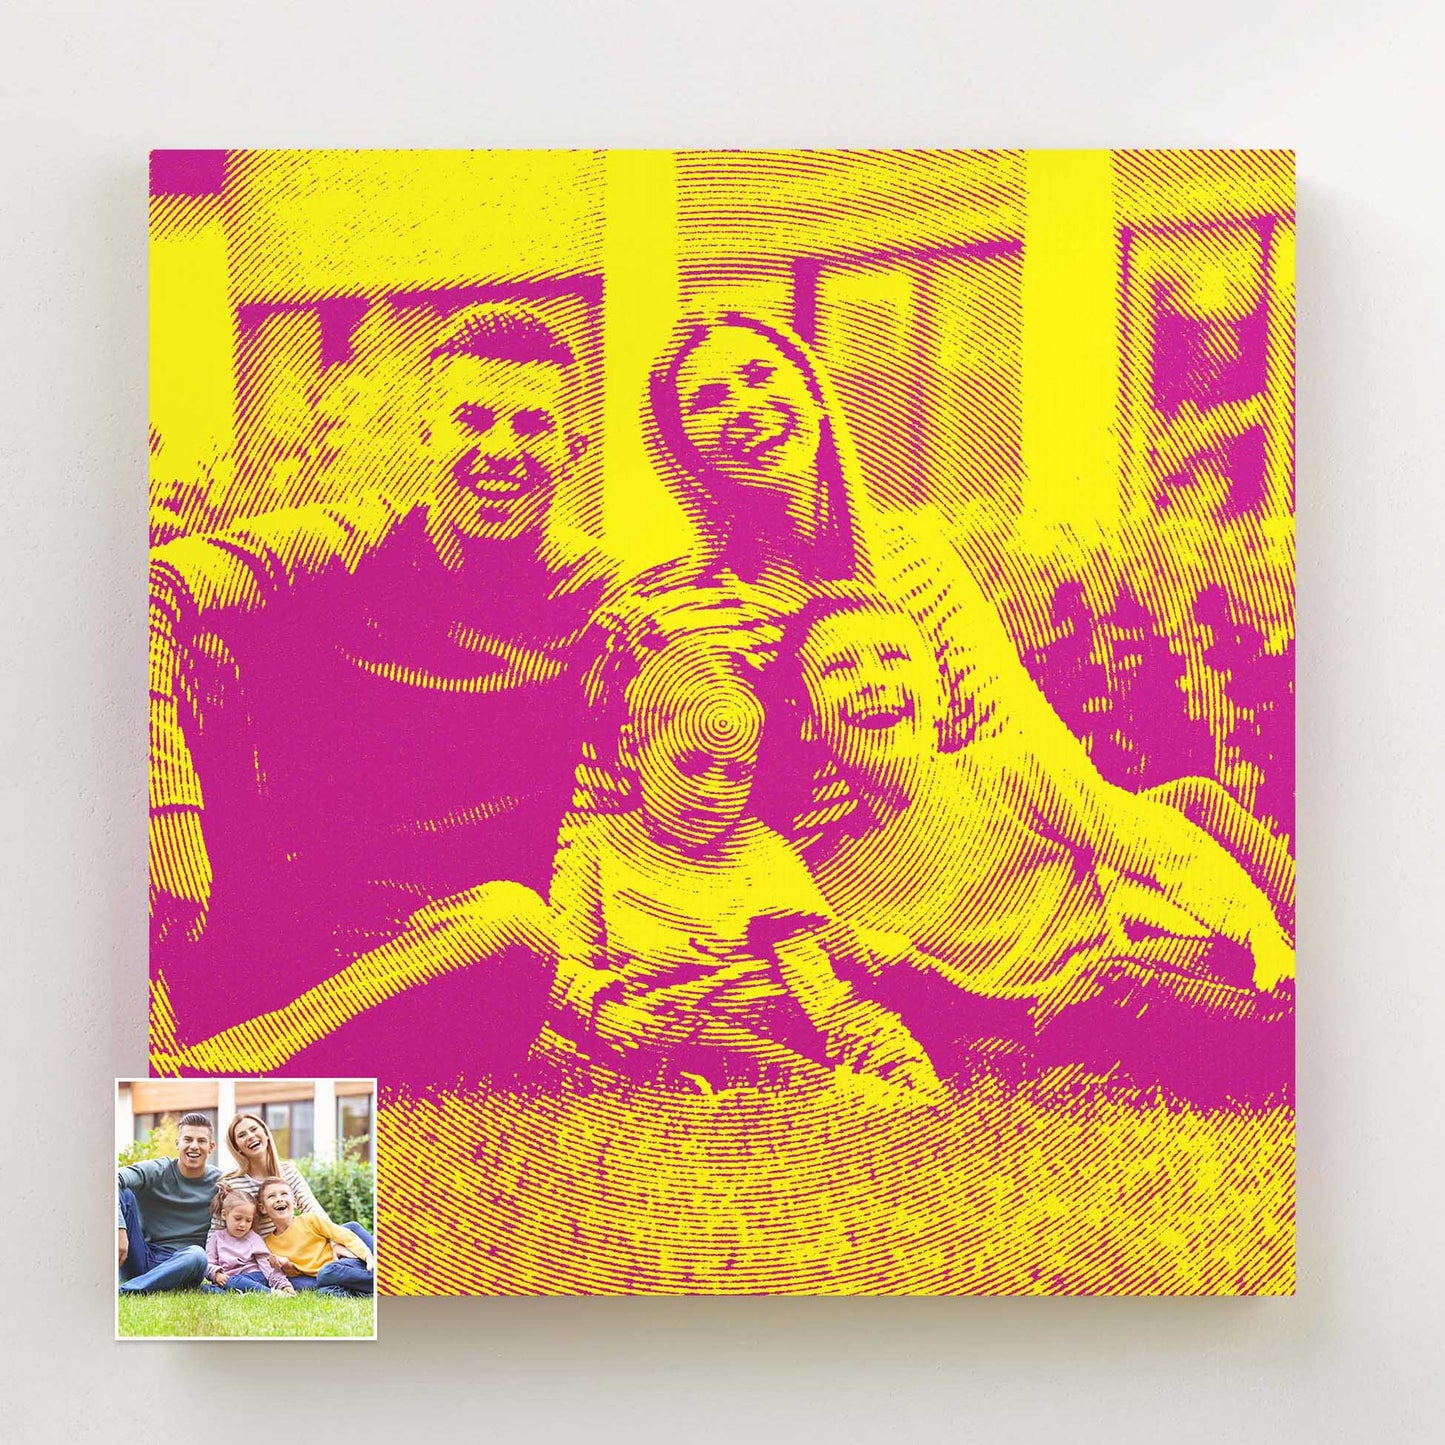 Immerse yourself in the vibrant world of the Personalised Yellow and Pink Texture Canvas